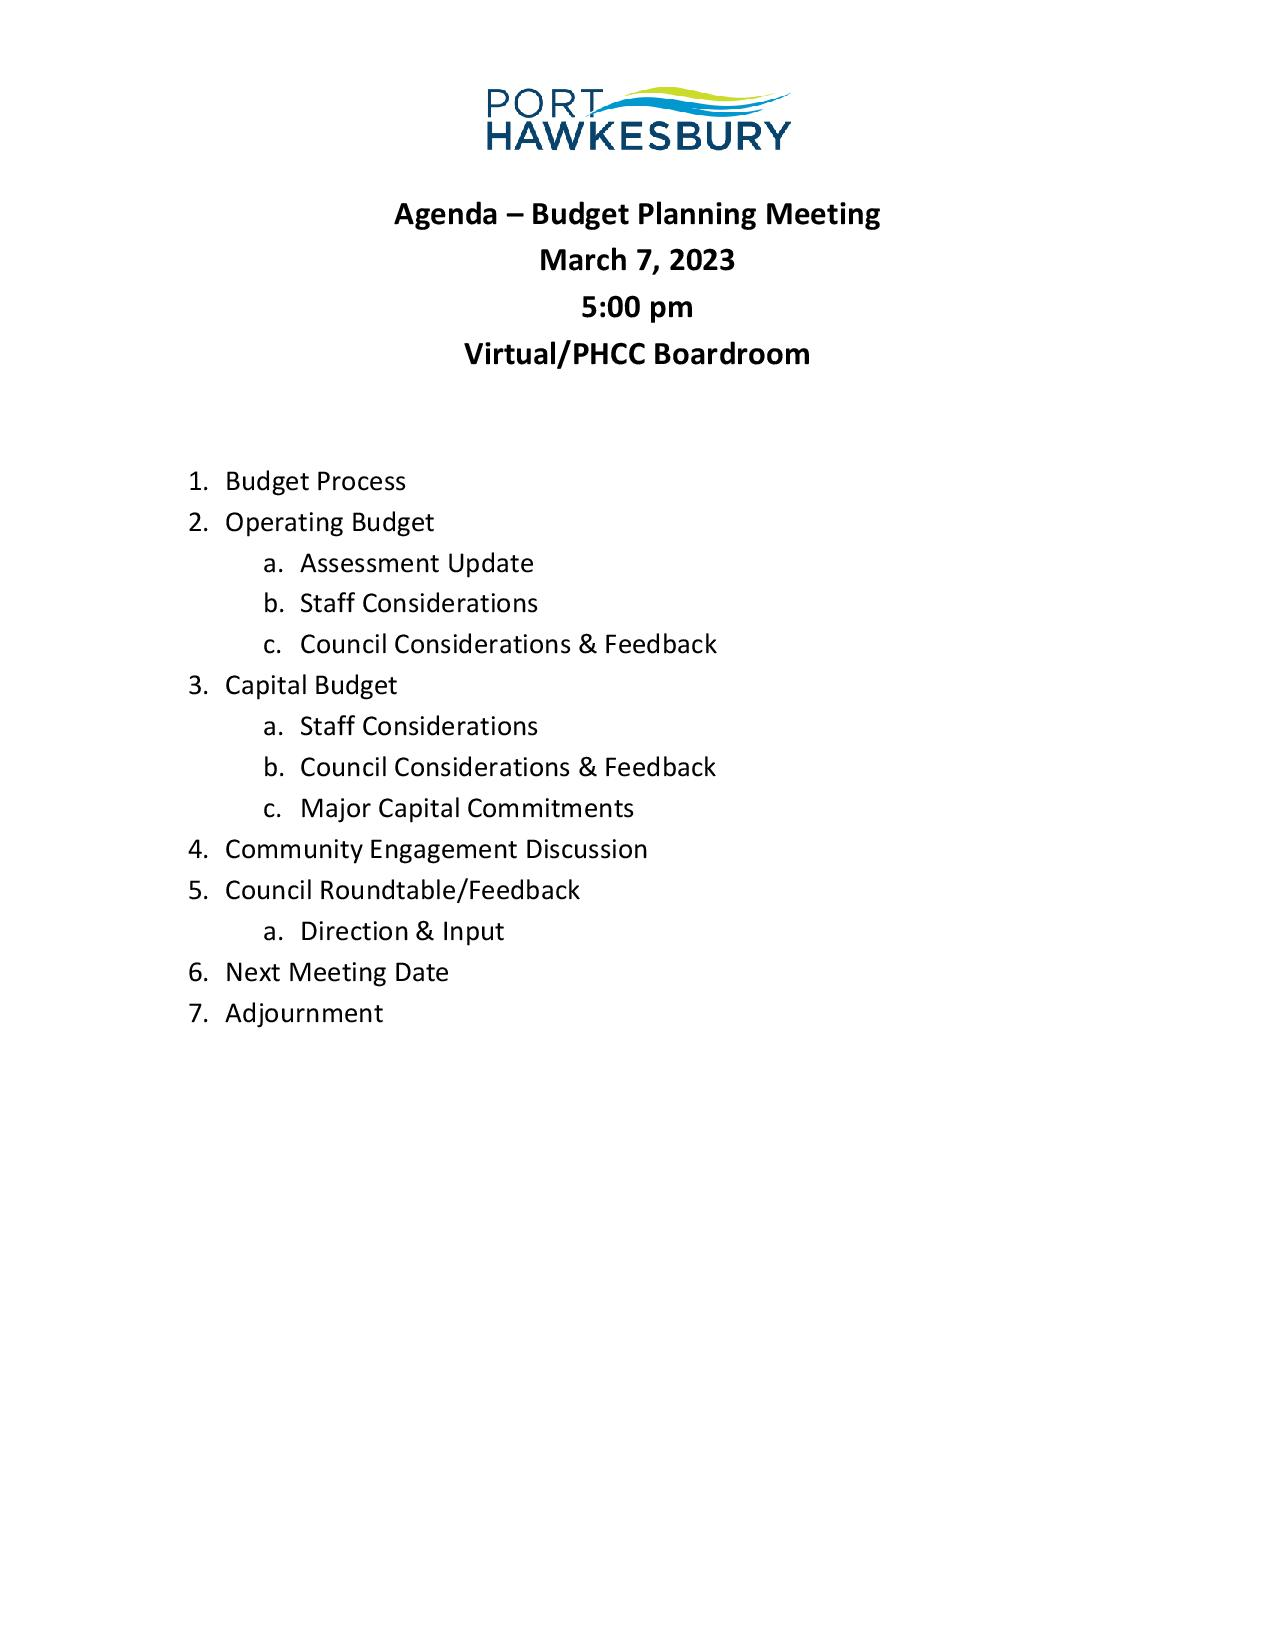 Budget Planning Meeting of Council – March 7, 2023